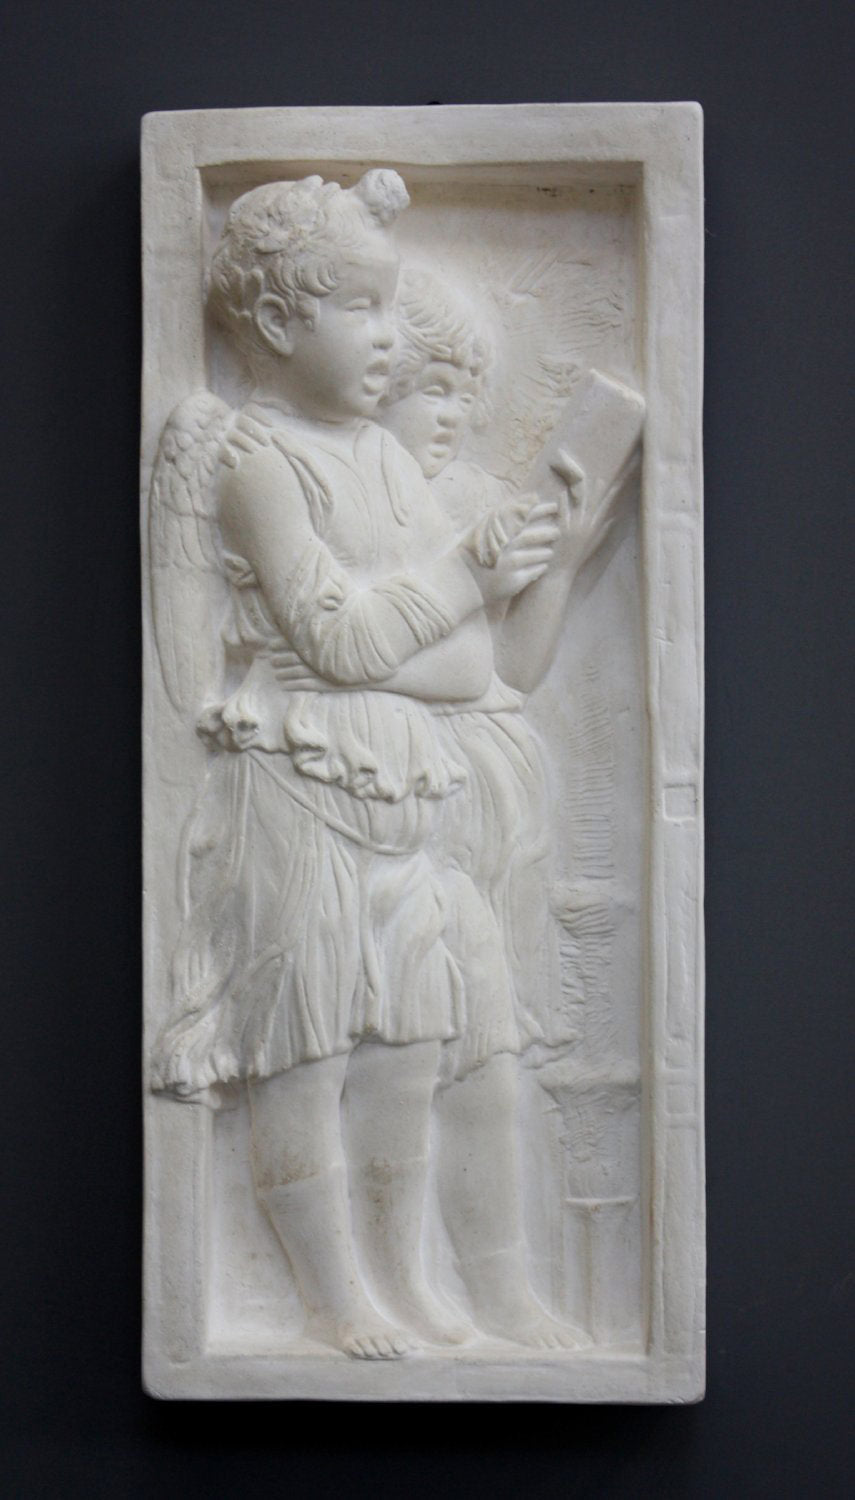 photo of plaster cast relief sculpture with two angels singing from a book on a gray background